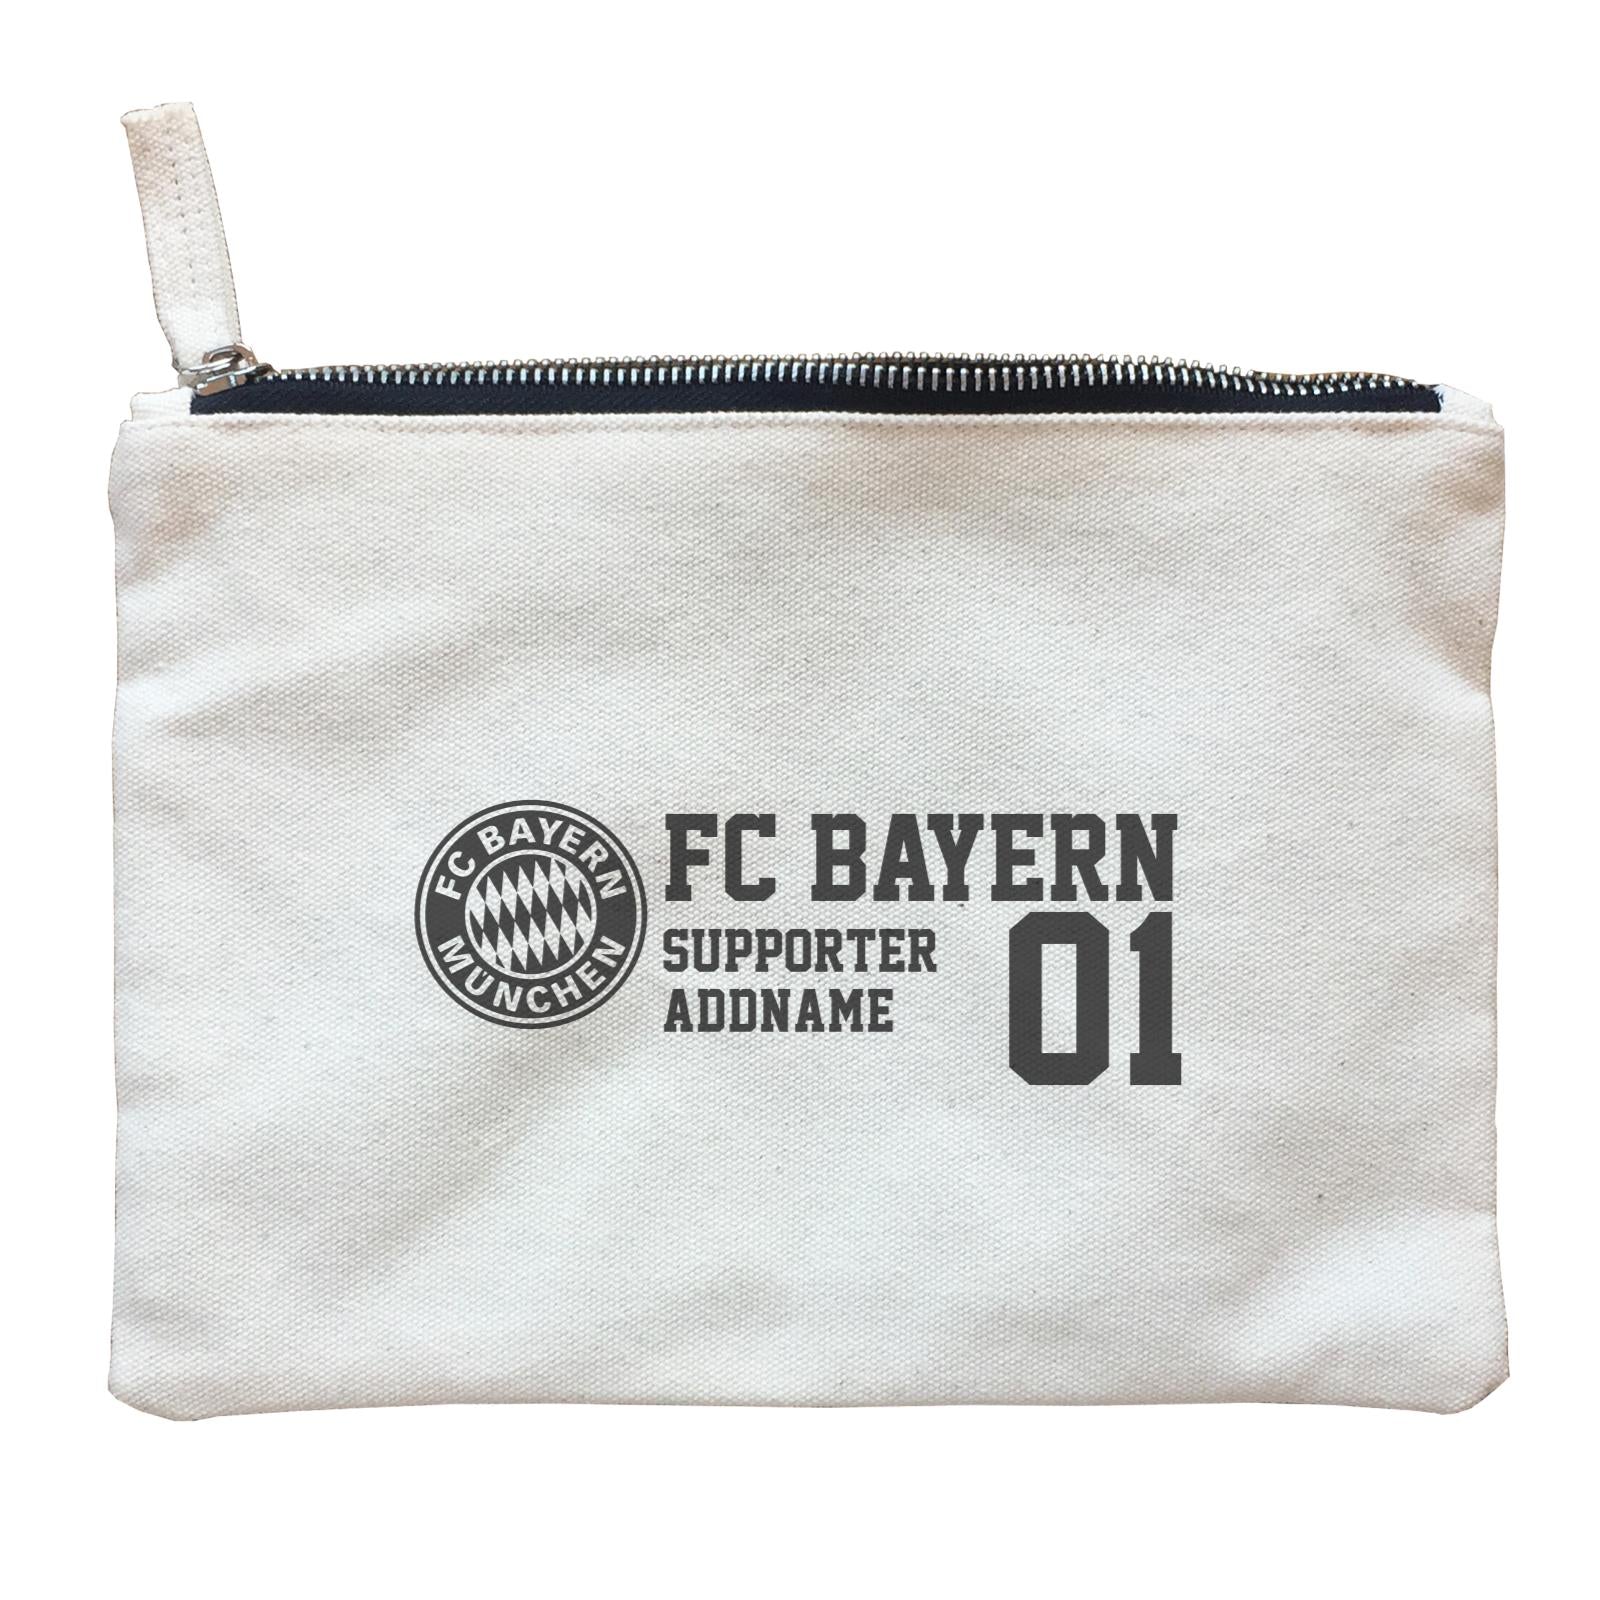 FC Bayern Football Supporter Accessories Addname Zipper Pouch